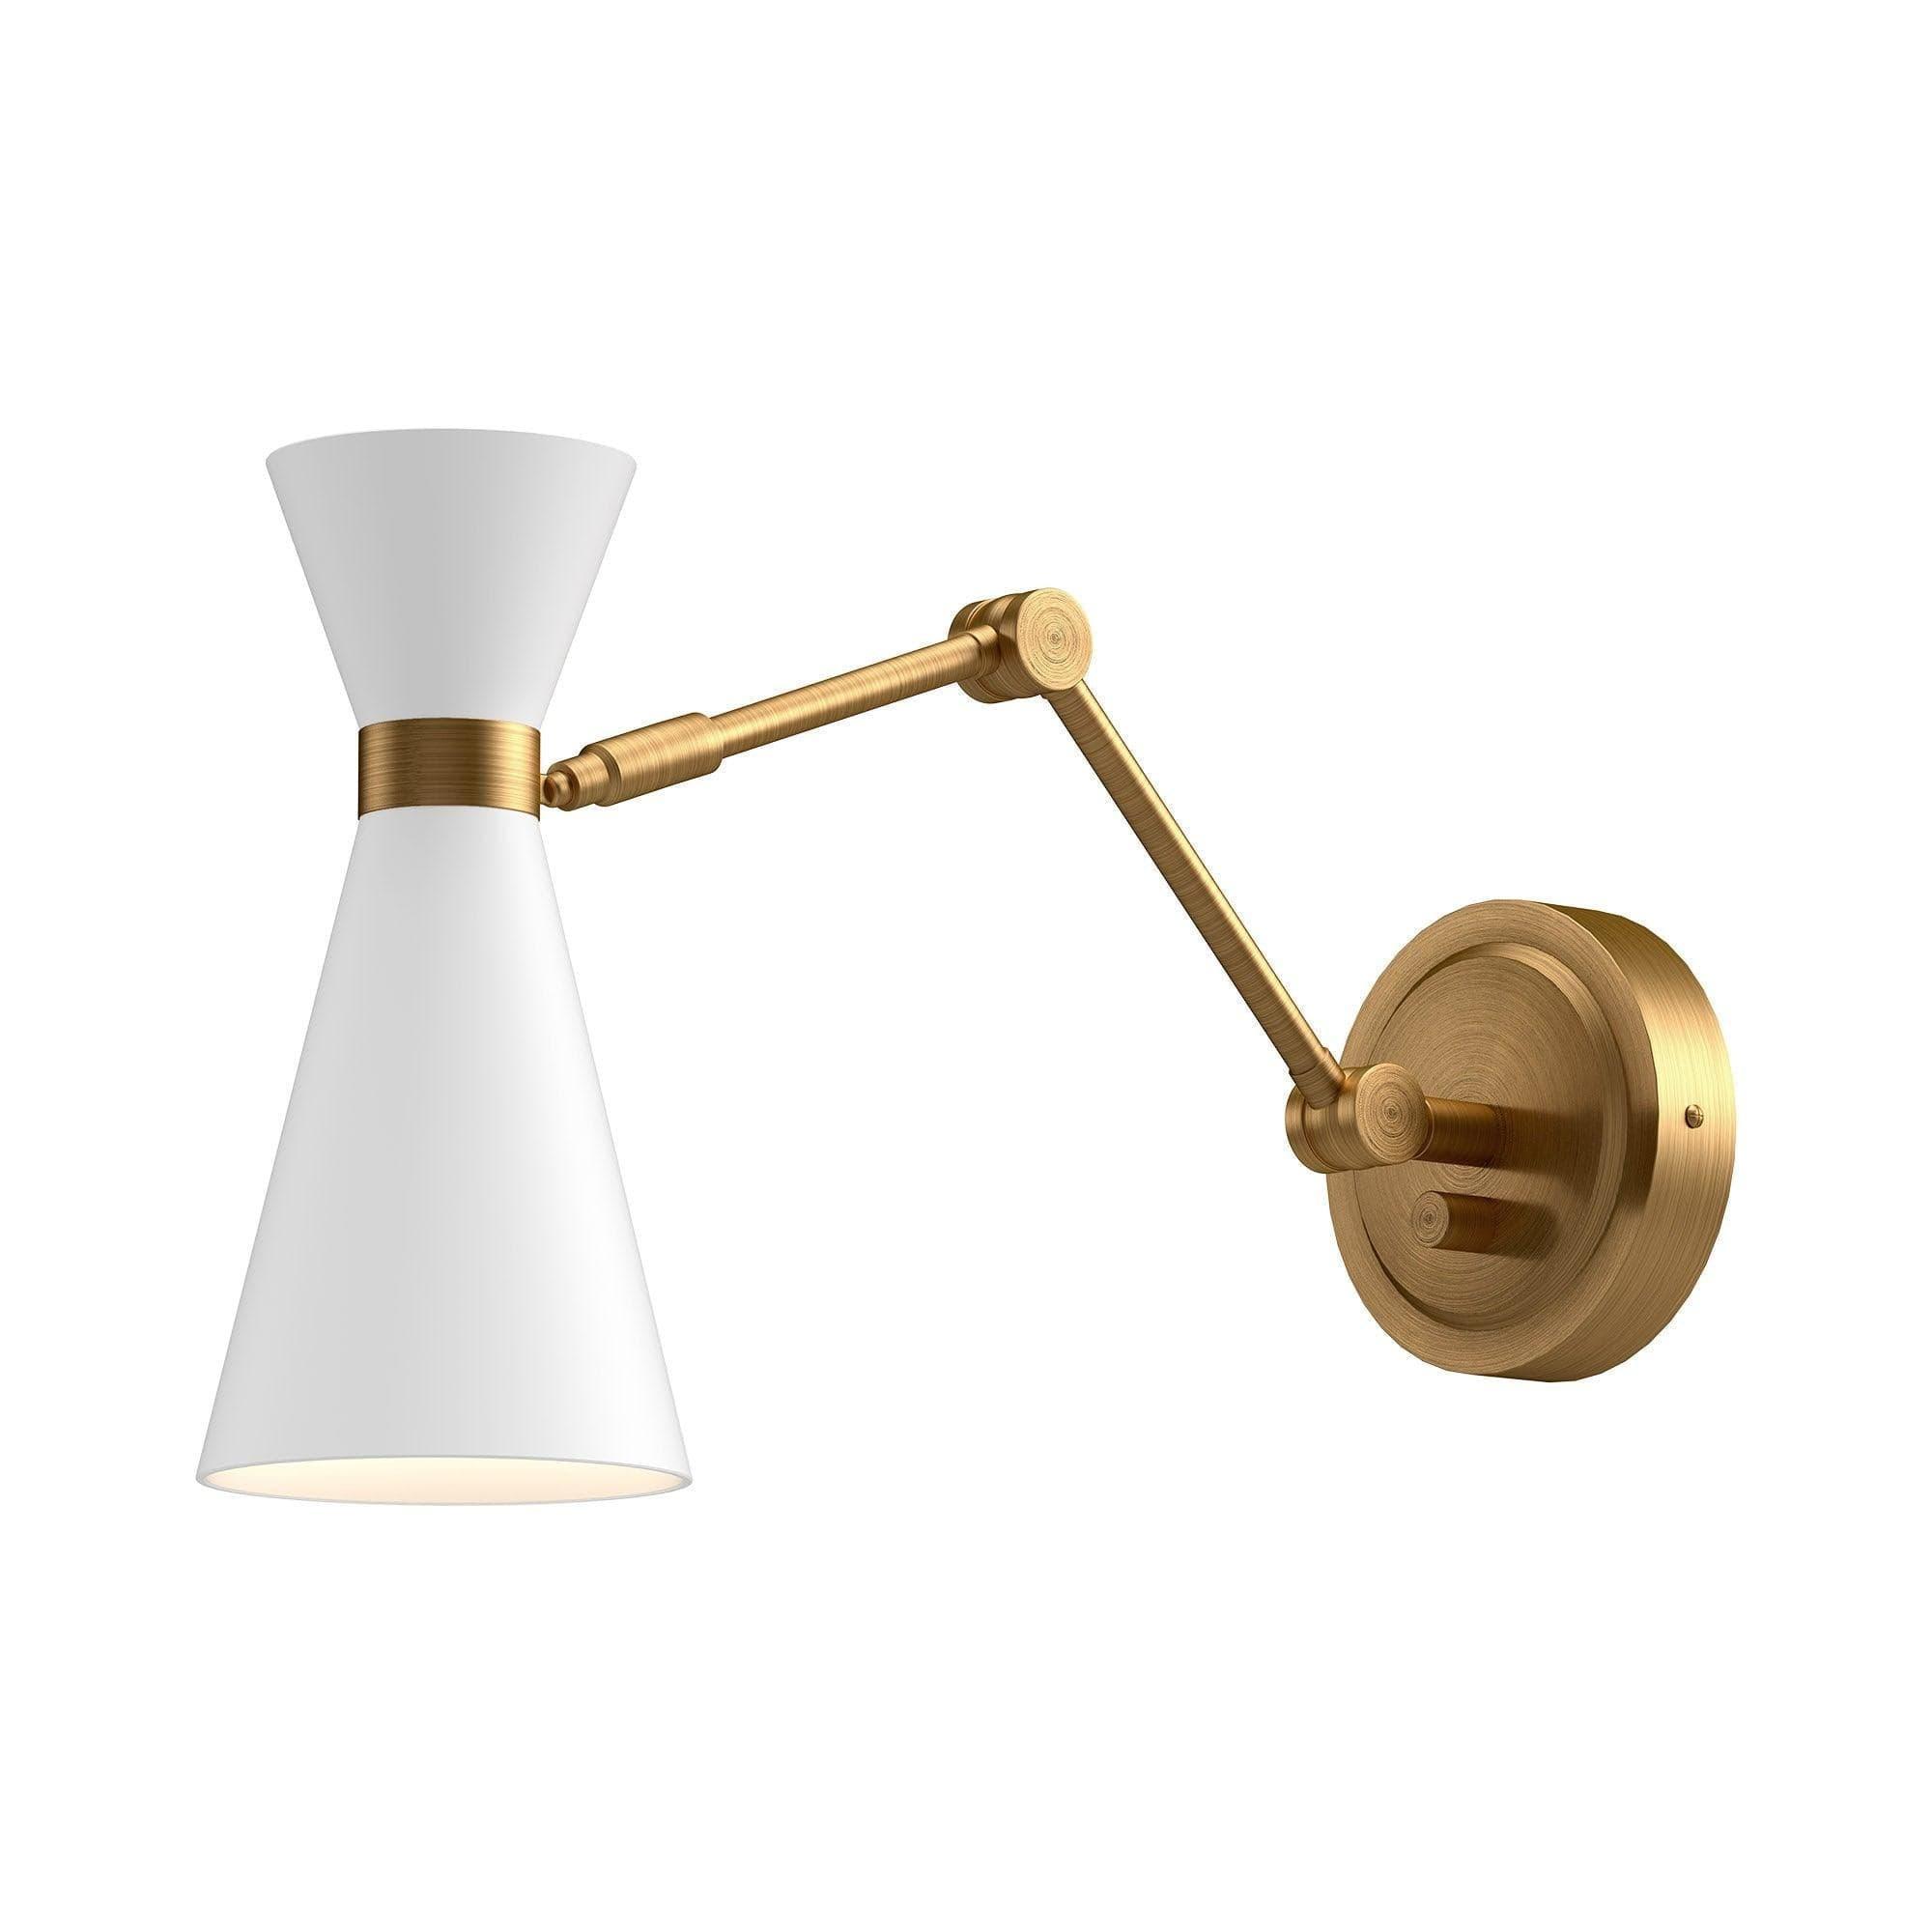 Montreal Lighting & Hardware - Blake Articulating Wall Sconce by Alora | OVERSTOCK - WV574524WHAG-OS | Montreal Lighting & Hardware